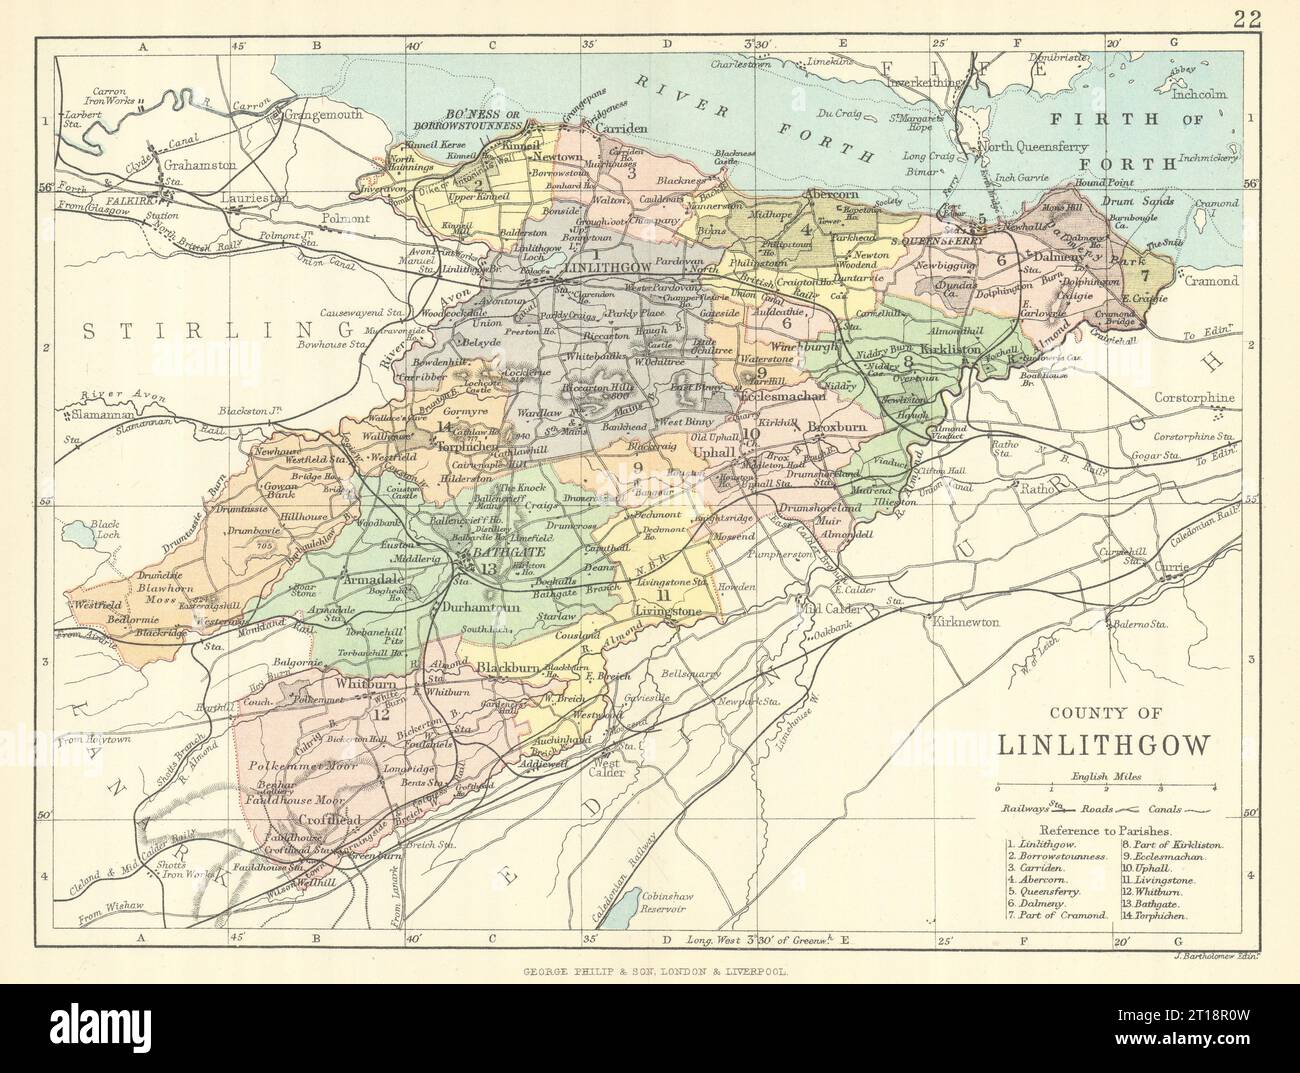 'County of Linlithgow'. Linlithgowshire. Parishes. BARTHOLOMEW 1888 old map Stock Photo